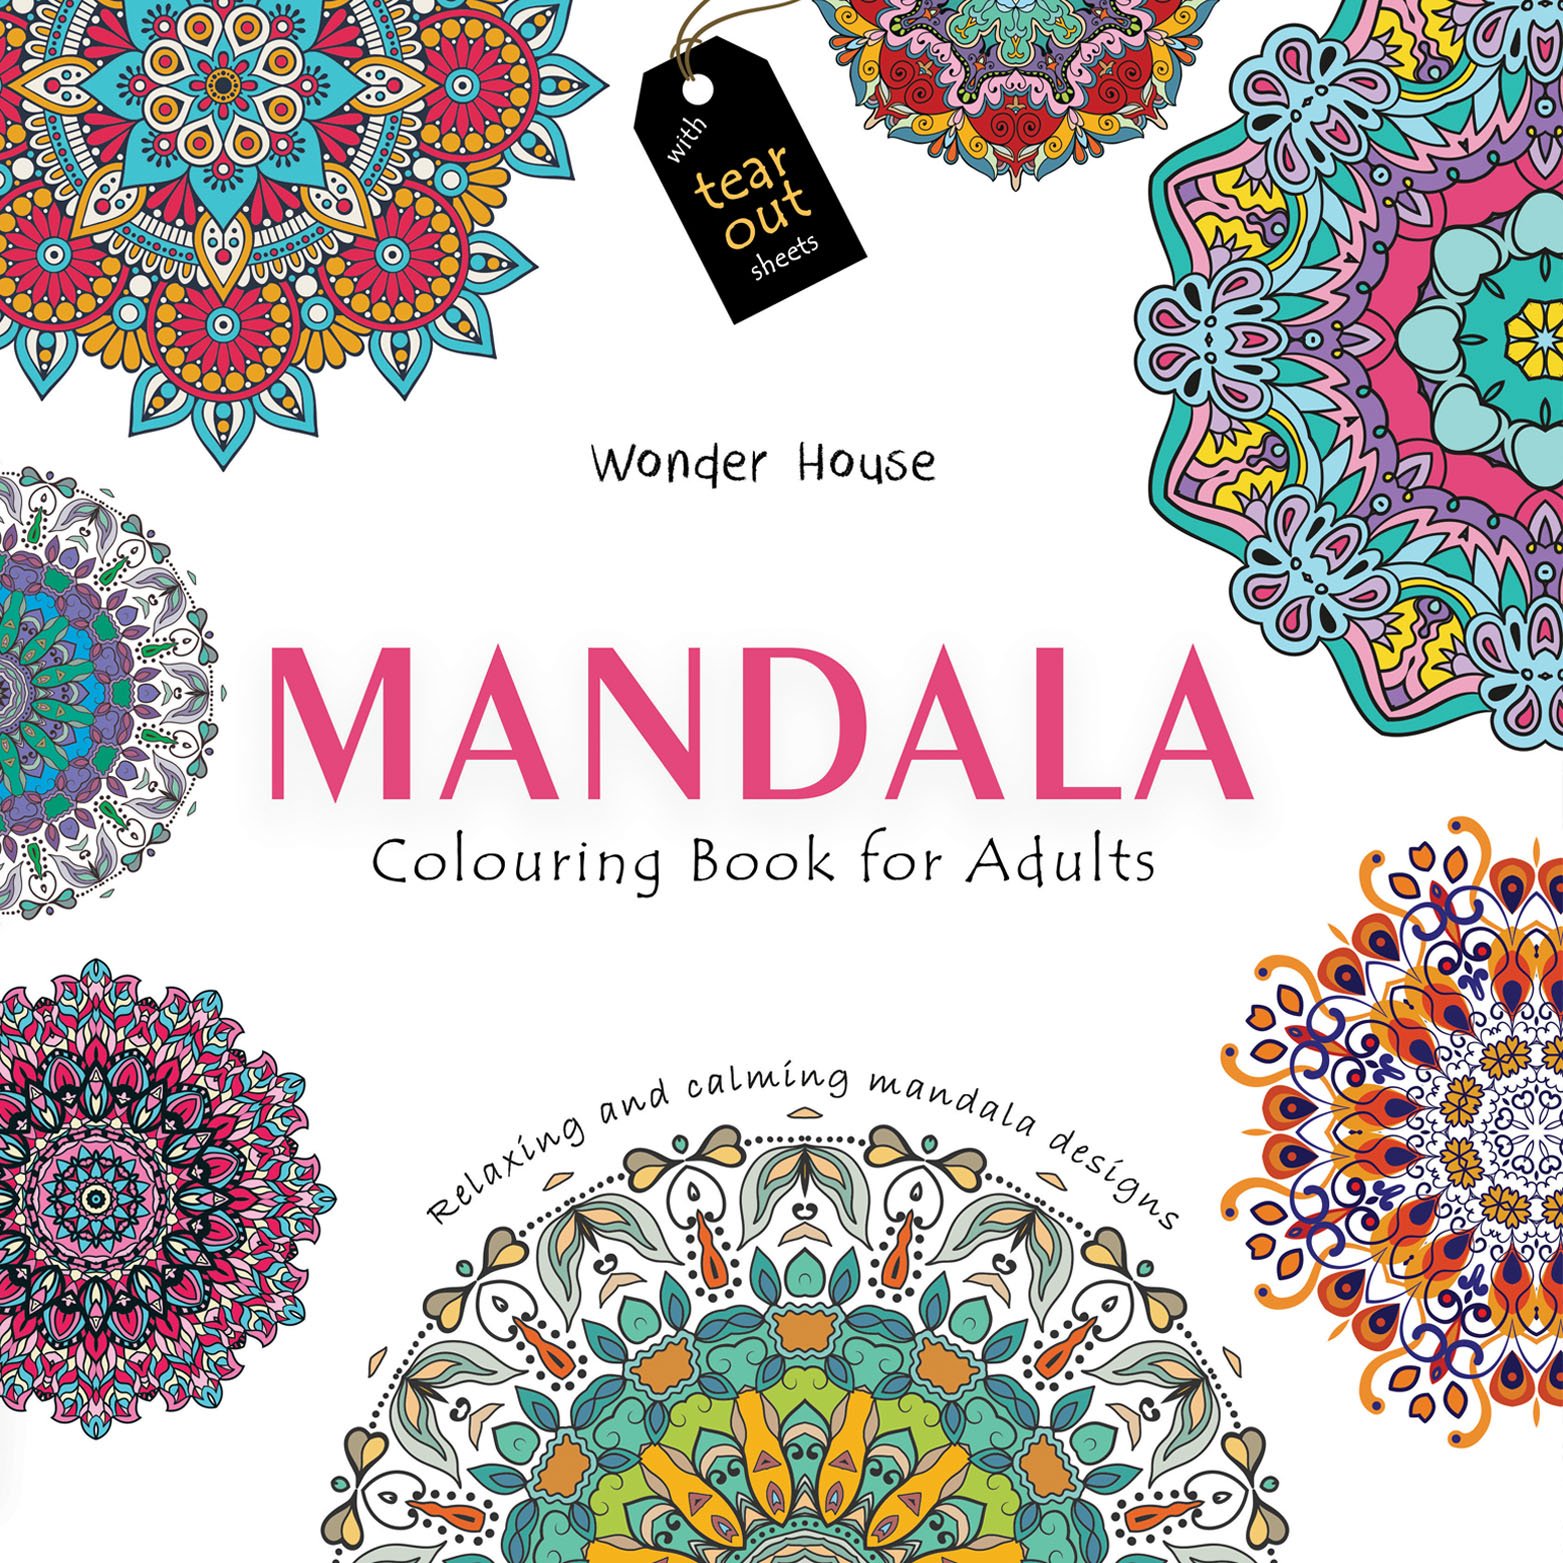 Mandala-Colouring Books for Adults with Tear Out Sheets-CLASSIBLOGGER